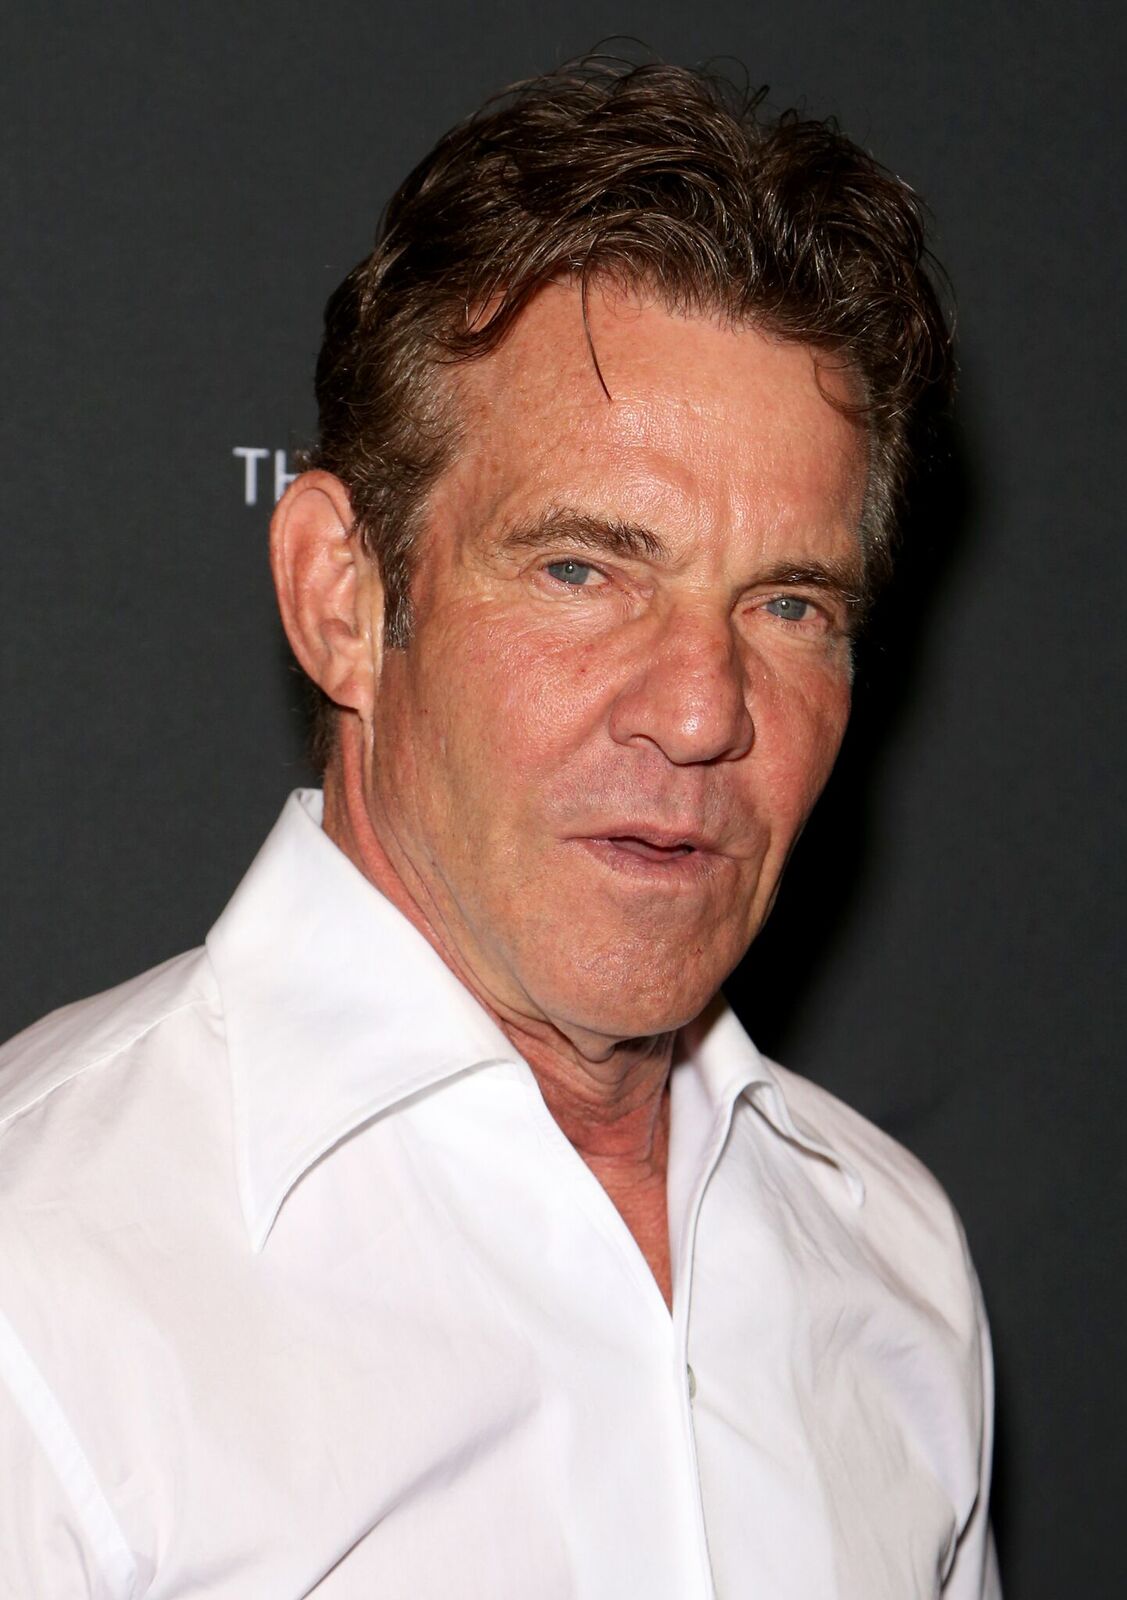 Dennis Quaid attends "Dennis Quaid and The Sharks at The Barbershop Cuts & Cocktails at The Cosmopolitan" of Las Vegas on May 11, 2019. | Source: Getty Images